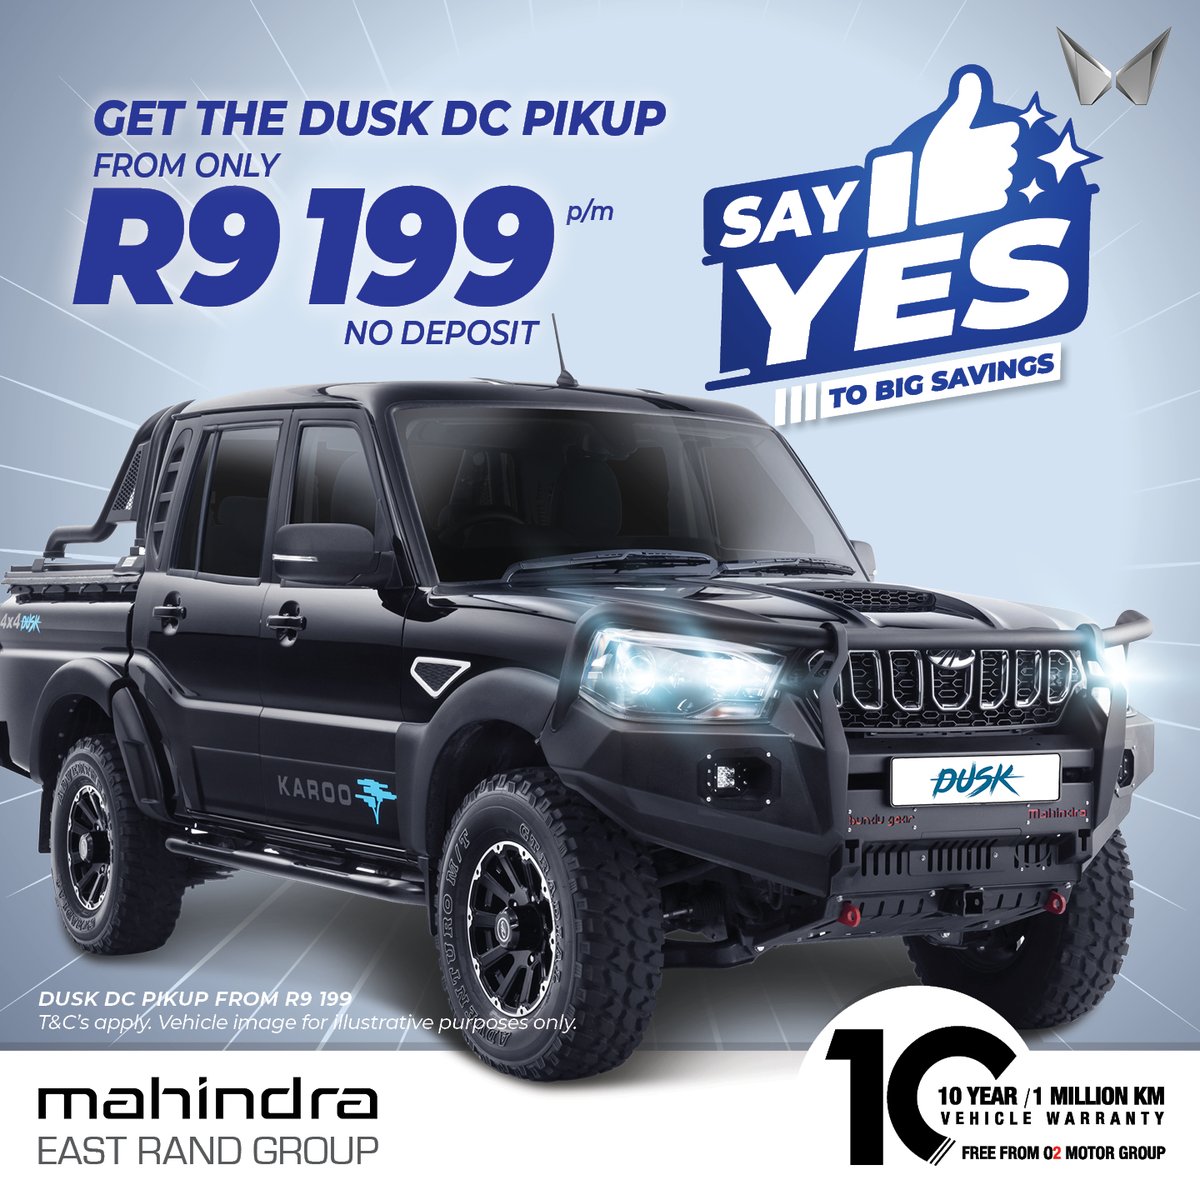 Say YES to the Mahindra Double Cab Karoo - your ultimate companion for off-road escapades and backcountry adventures.

Unleash your adventurous spirit and embrace the thrill of exploration with this rugged marvel. Designed for the boldest of journeys.

Take the first step tow ...